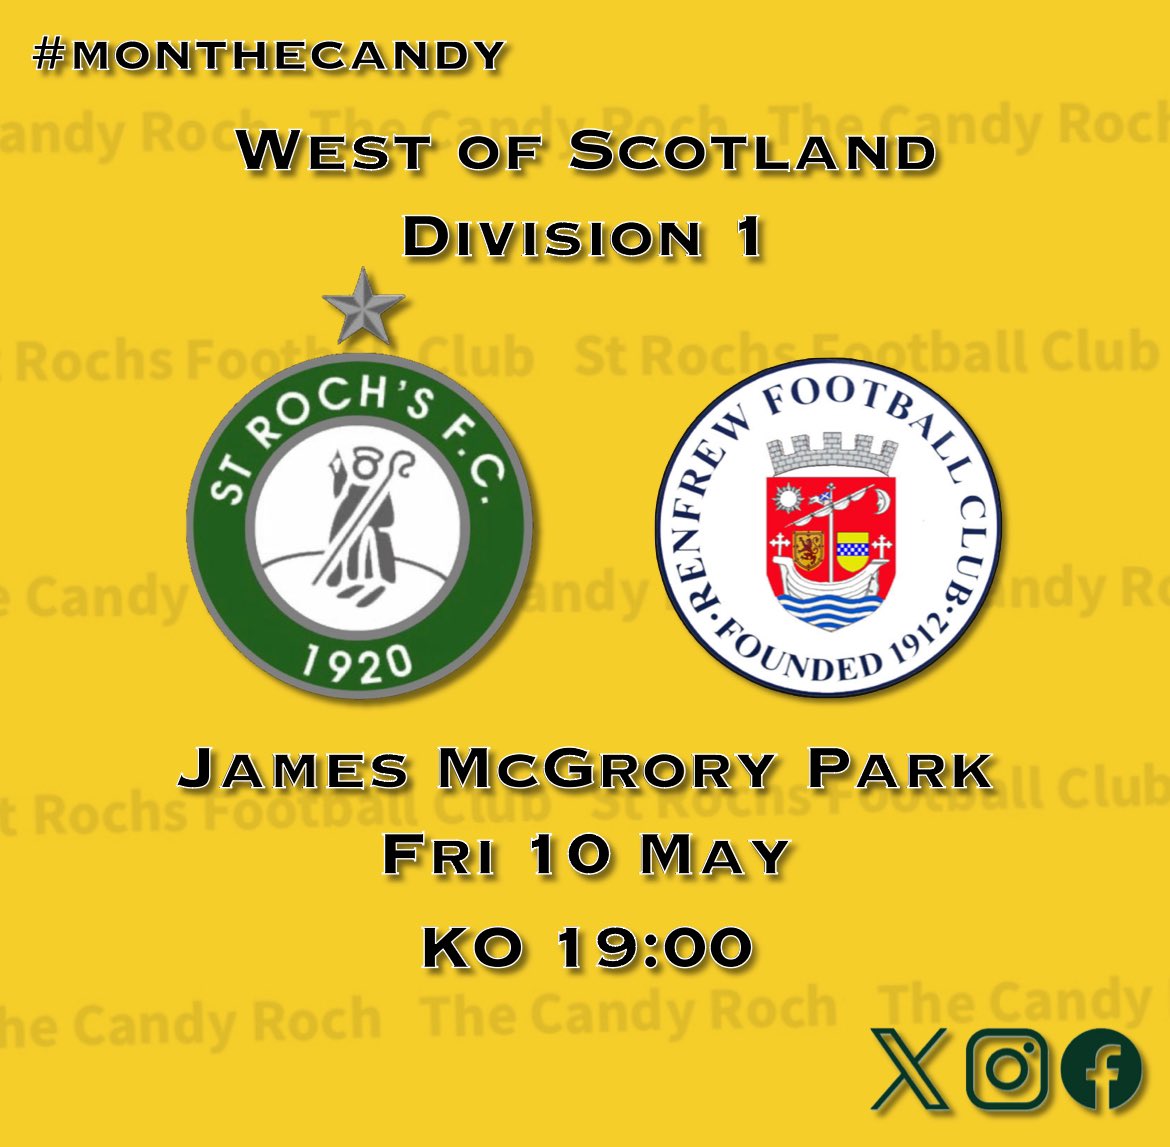 With kick off to our last home game approaching tomorrow….

Who would like to see a sneak peak of the new away kit TODAY that will be worn for the match vs Renfrew? 

#MonTheCandy